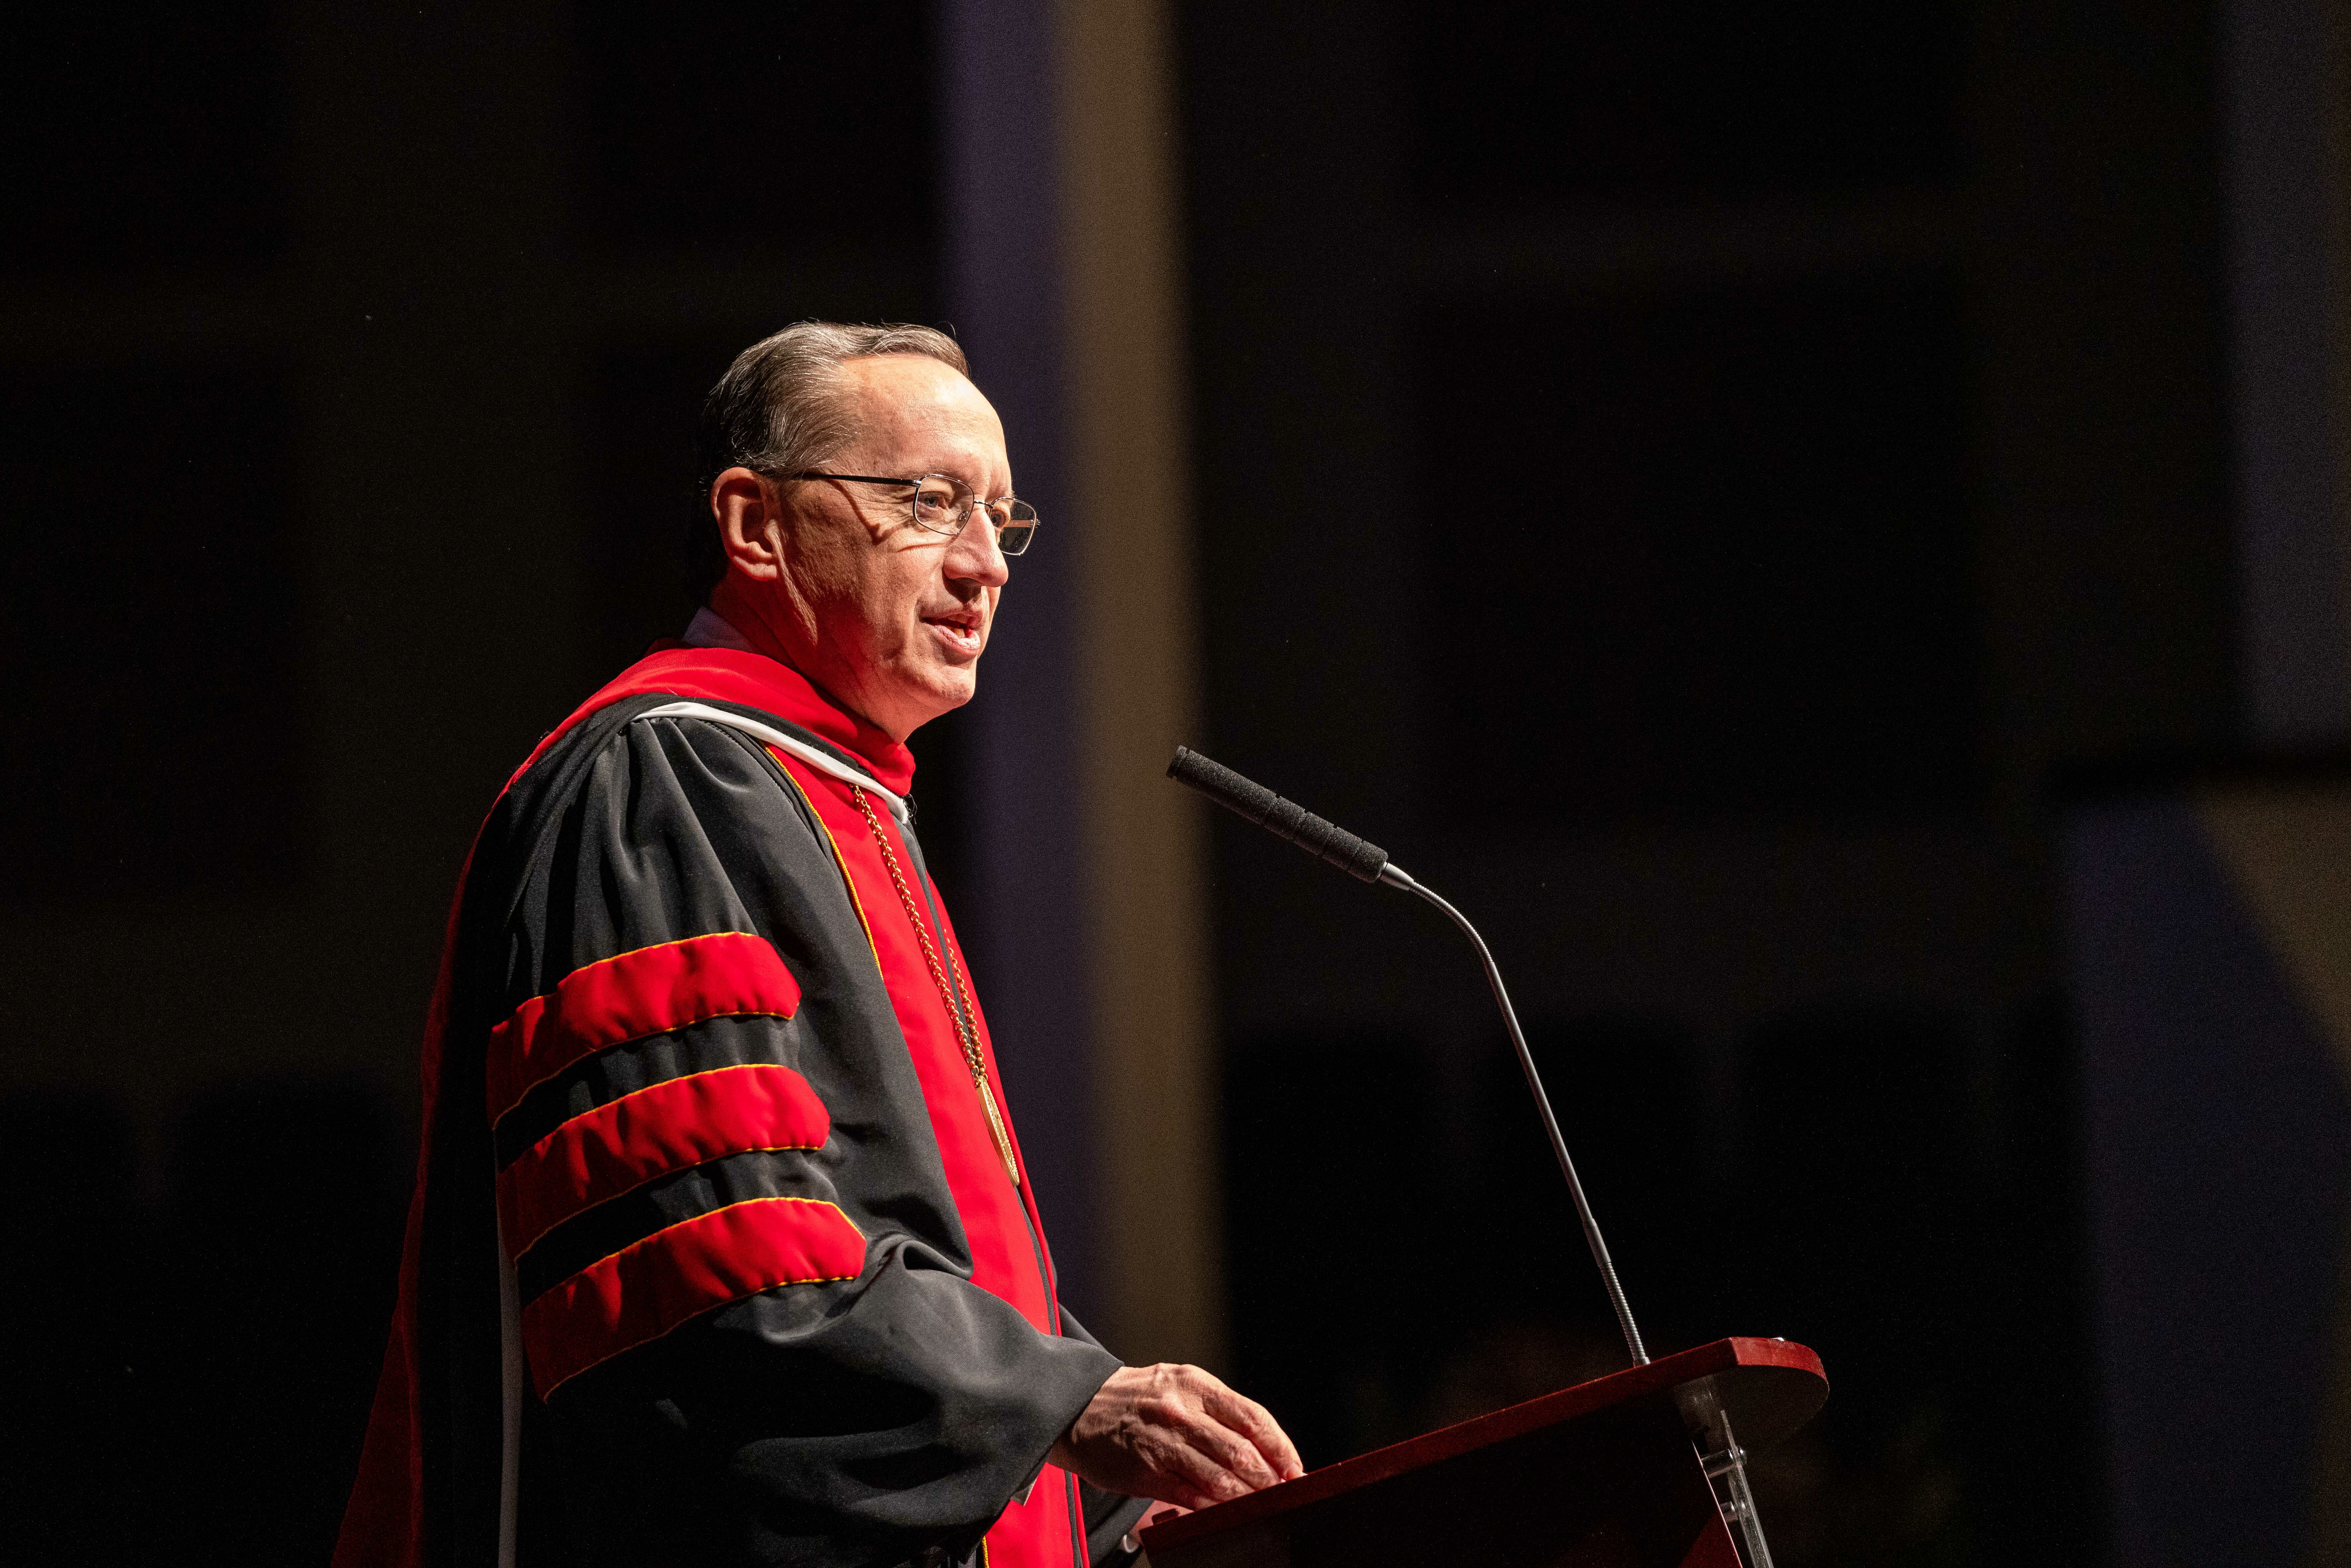 Iorg speaking at commencement winter 2021